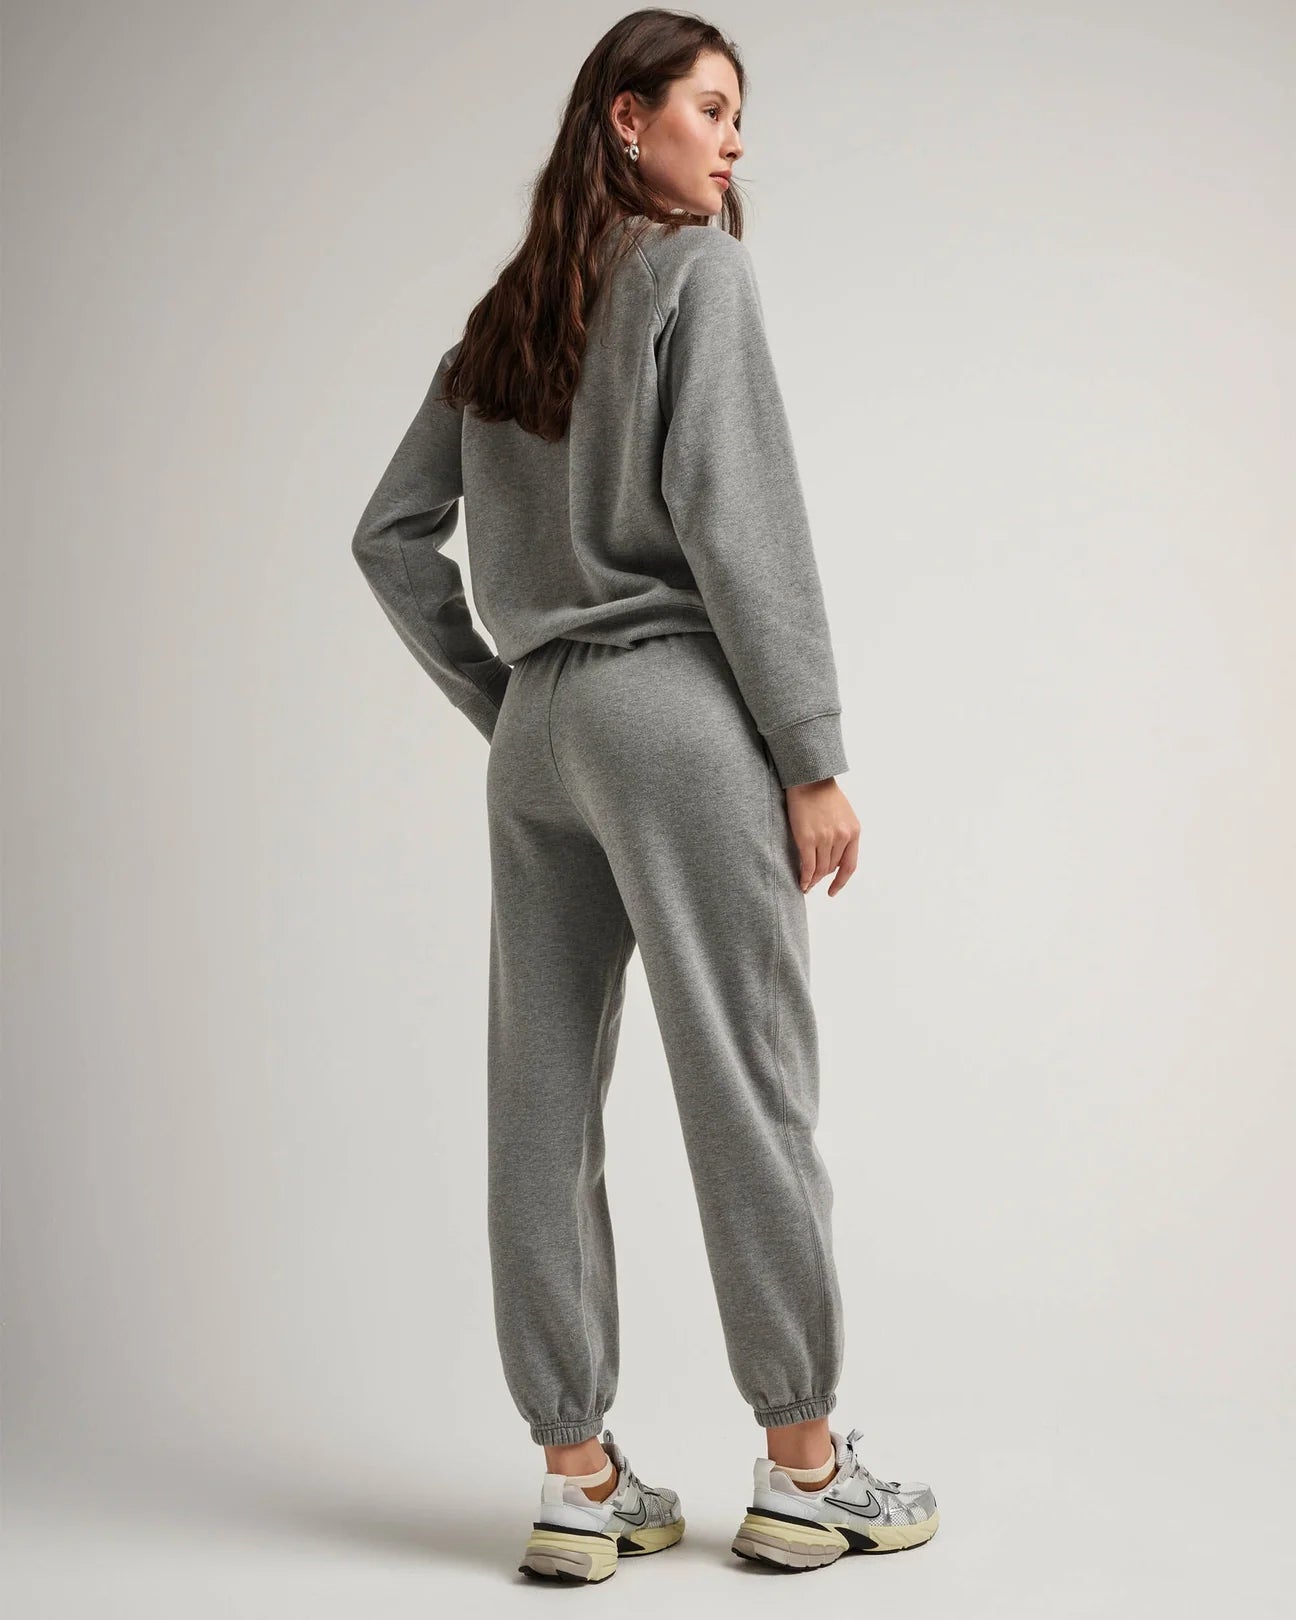 back view of model wearing recycled fleece classic sweatpant in color heather grey